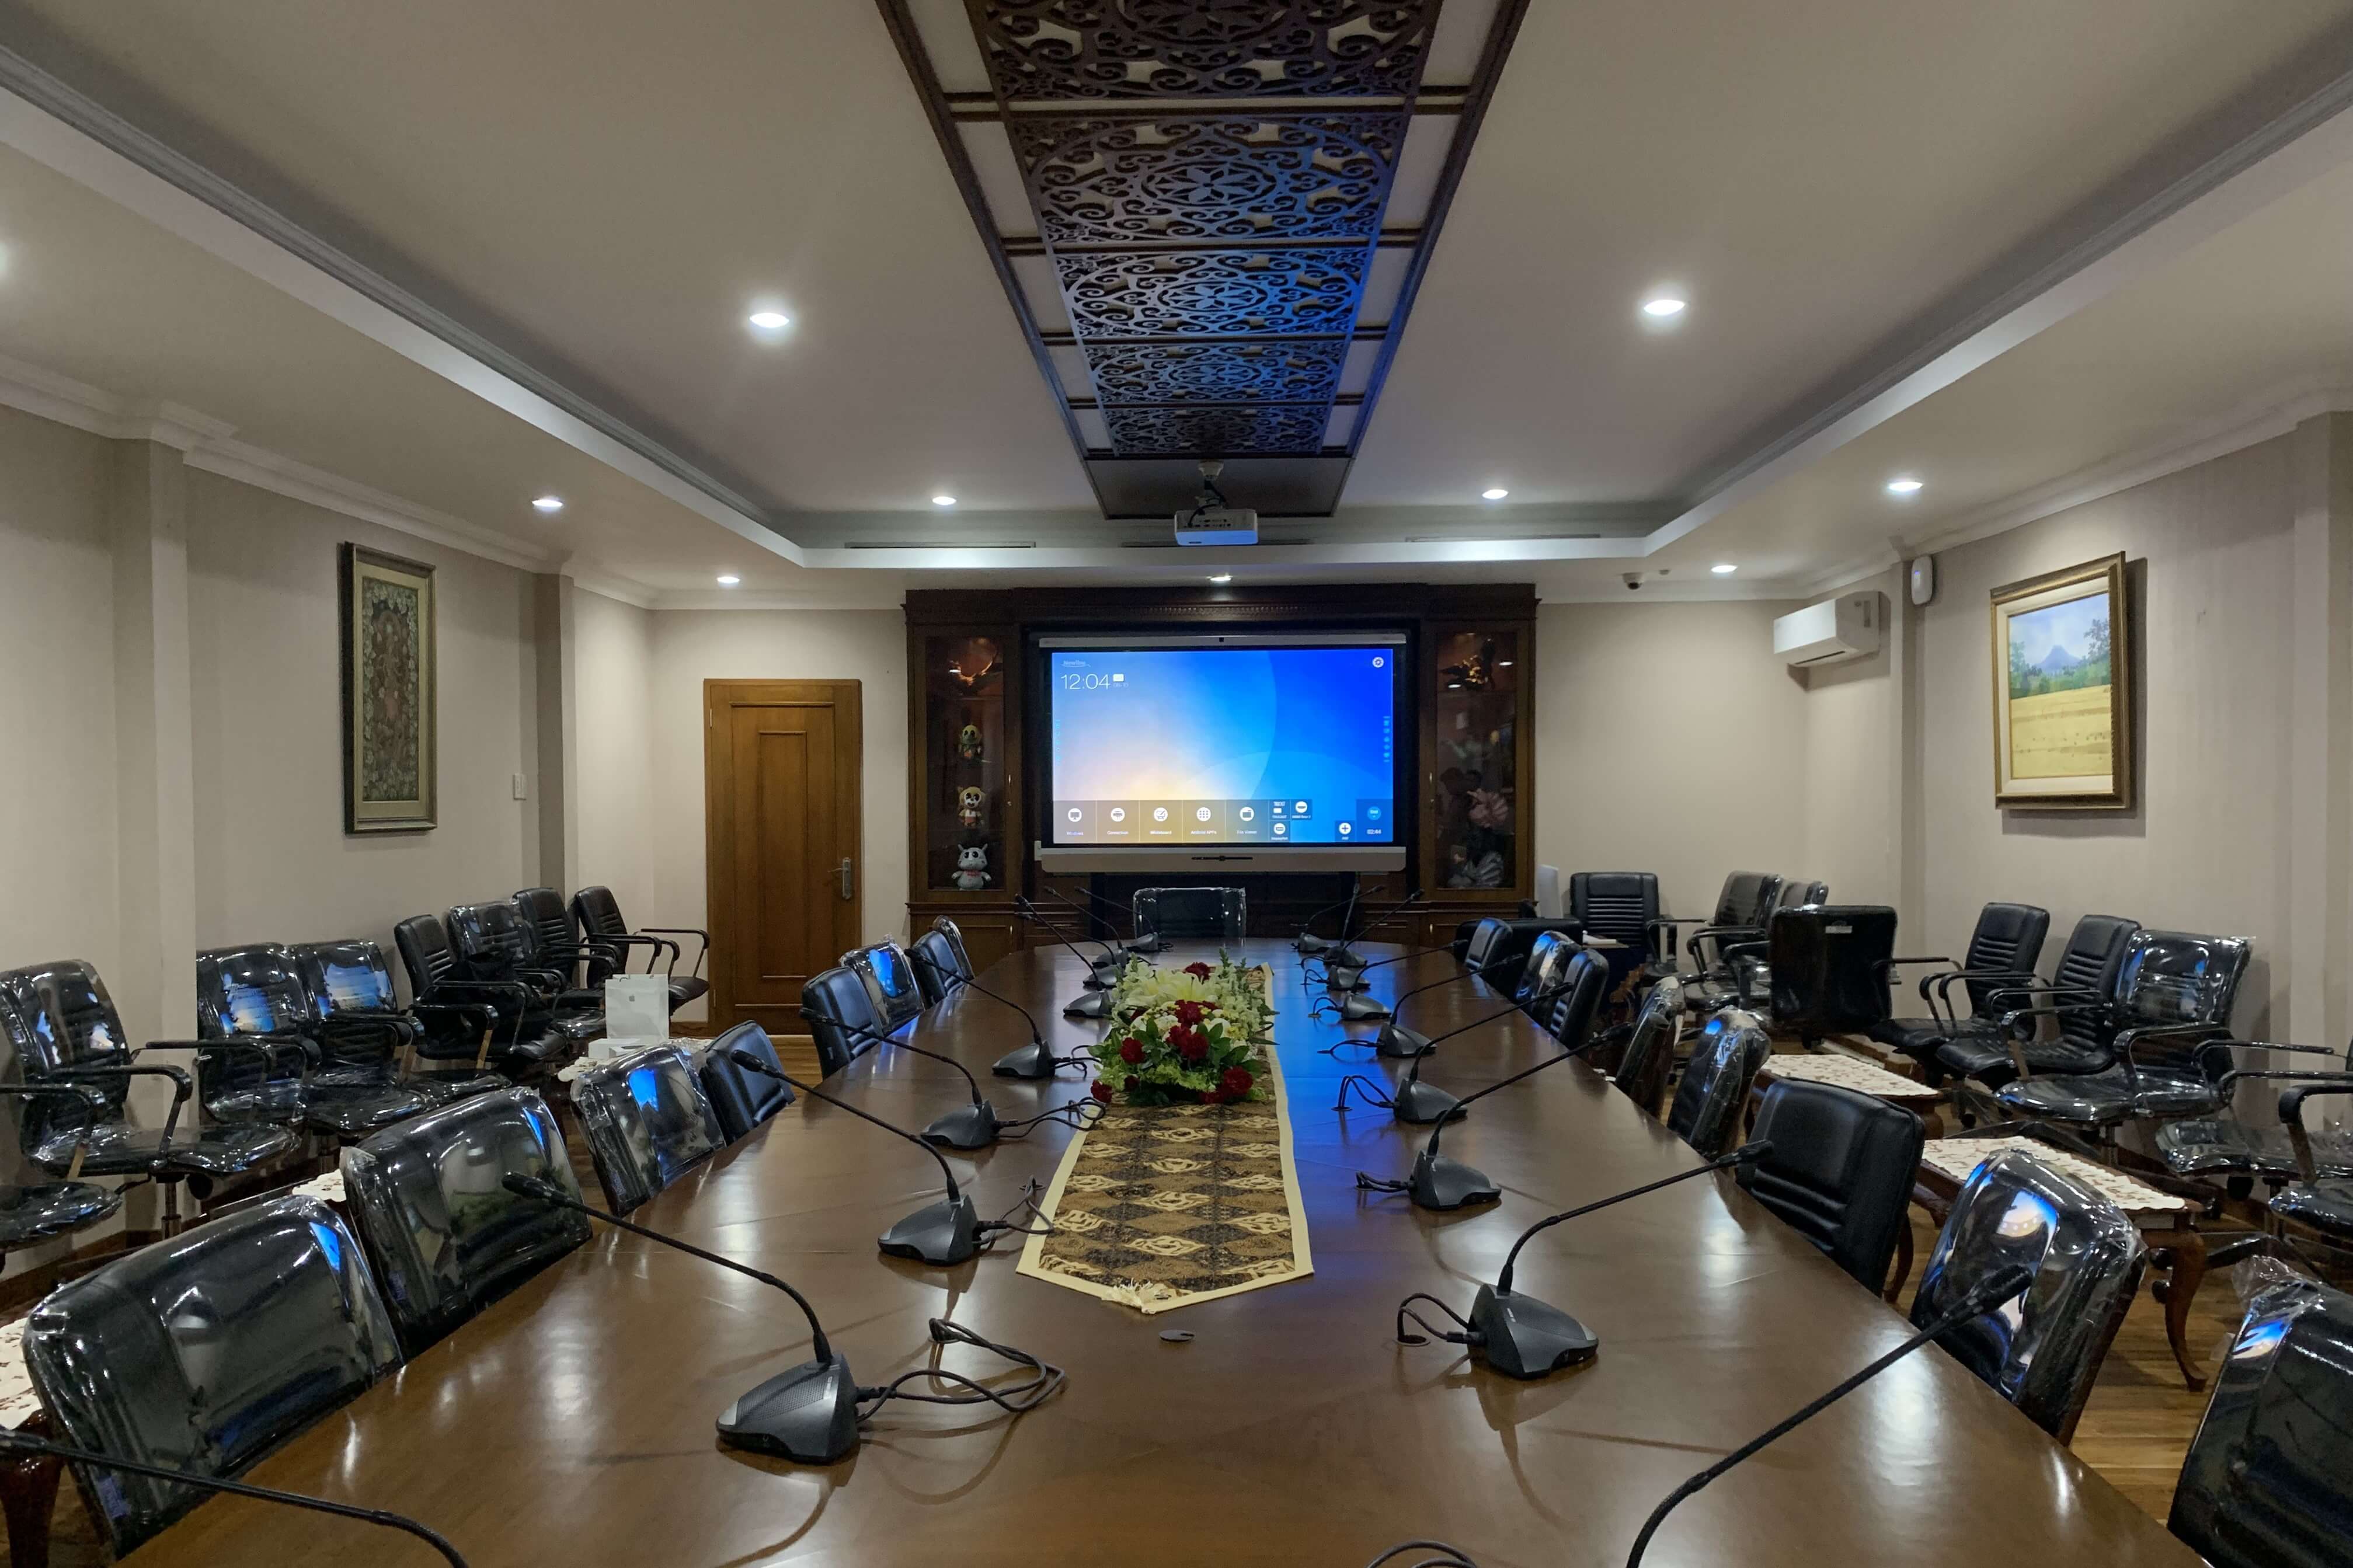 Presidential Palace Indonesia with newline interactive display